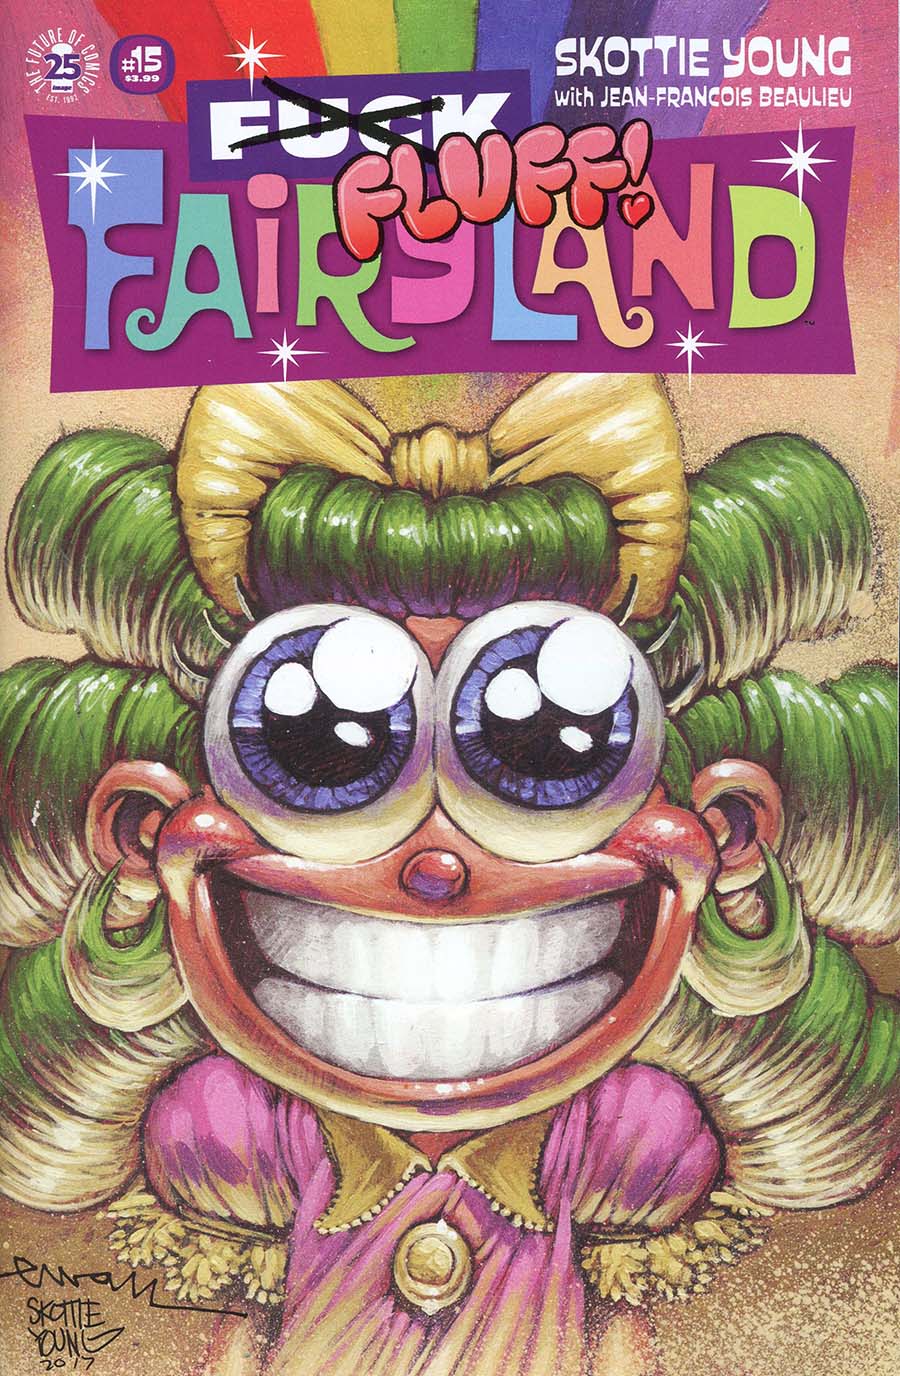 I Hate Fairyland #15 Cover B Variant Skottie Young F*ck Fairyland Cover